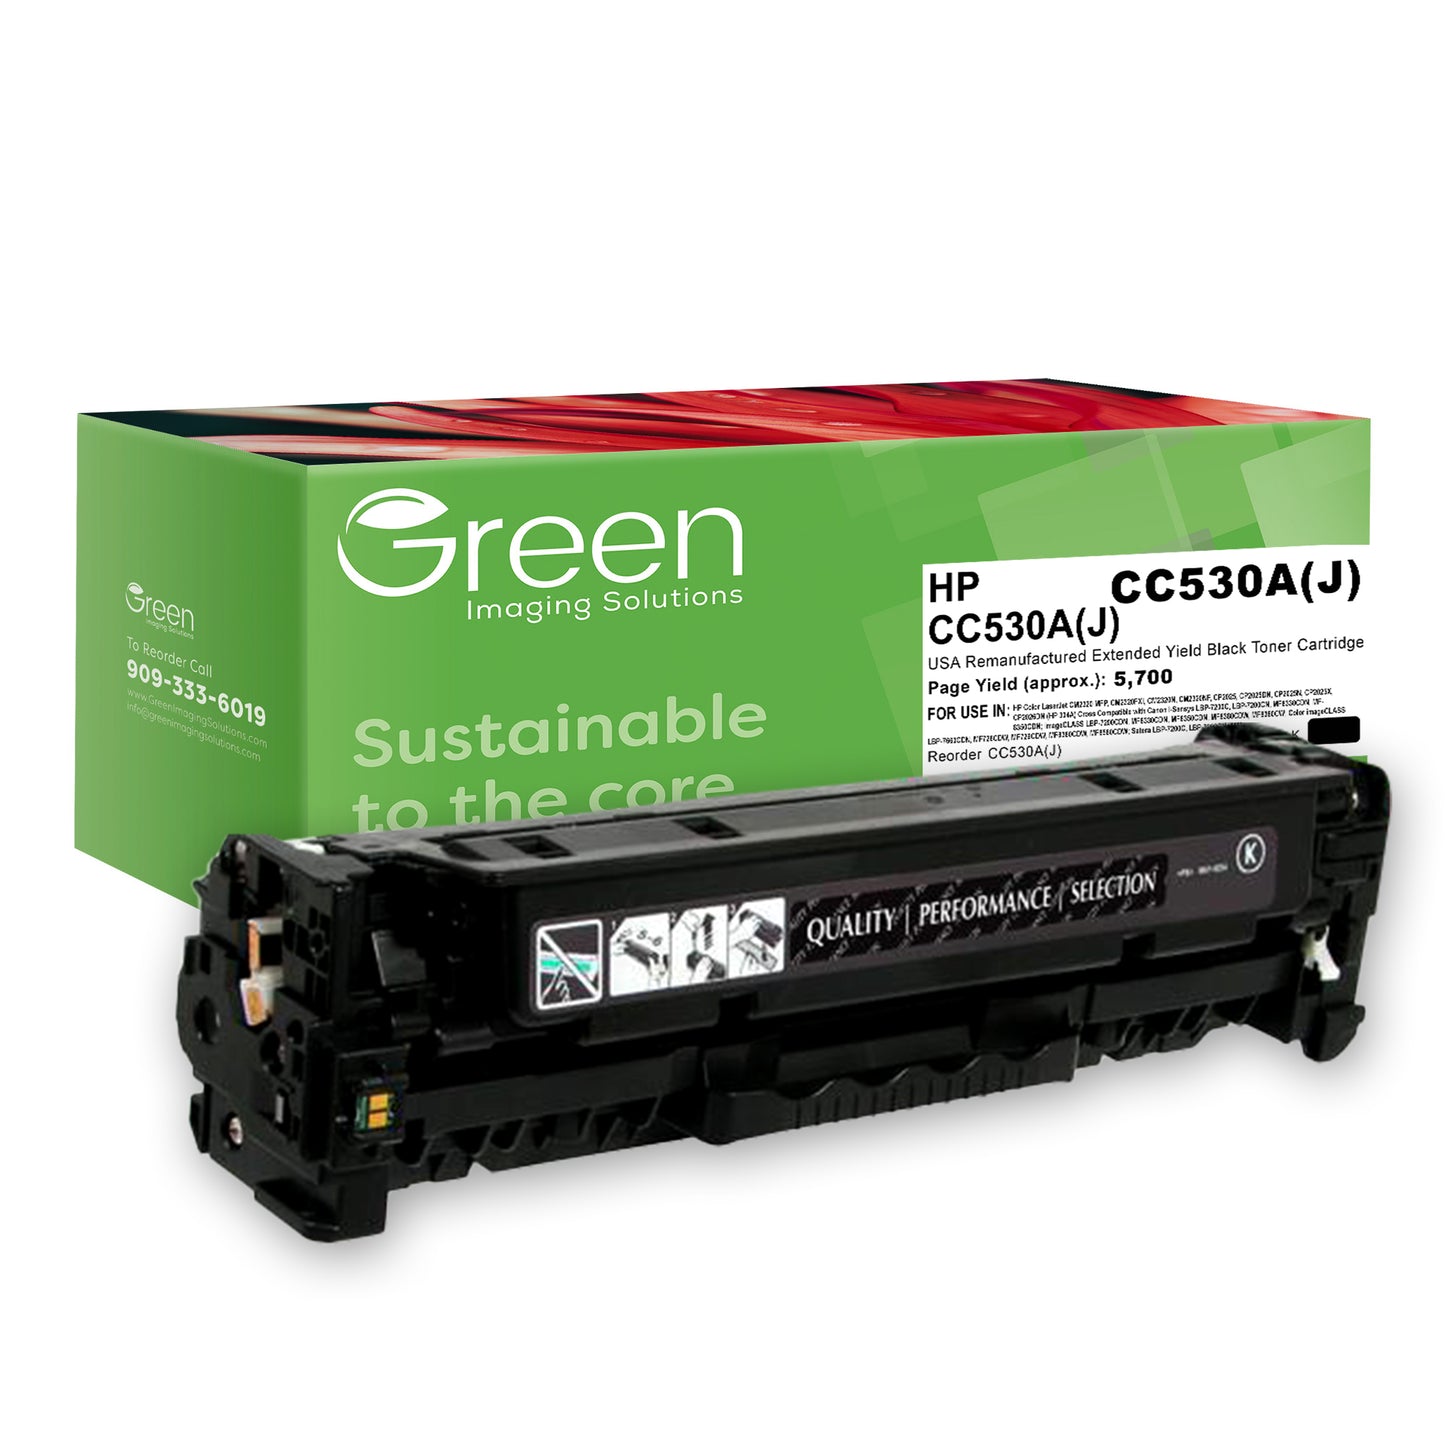 GIS USA Remanufactured Extended Yield Black Toner Cartridge for HP CC530A (HP 304A)